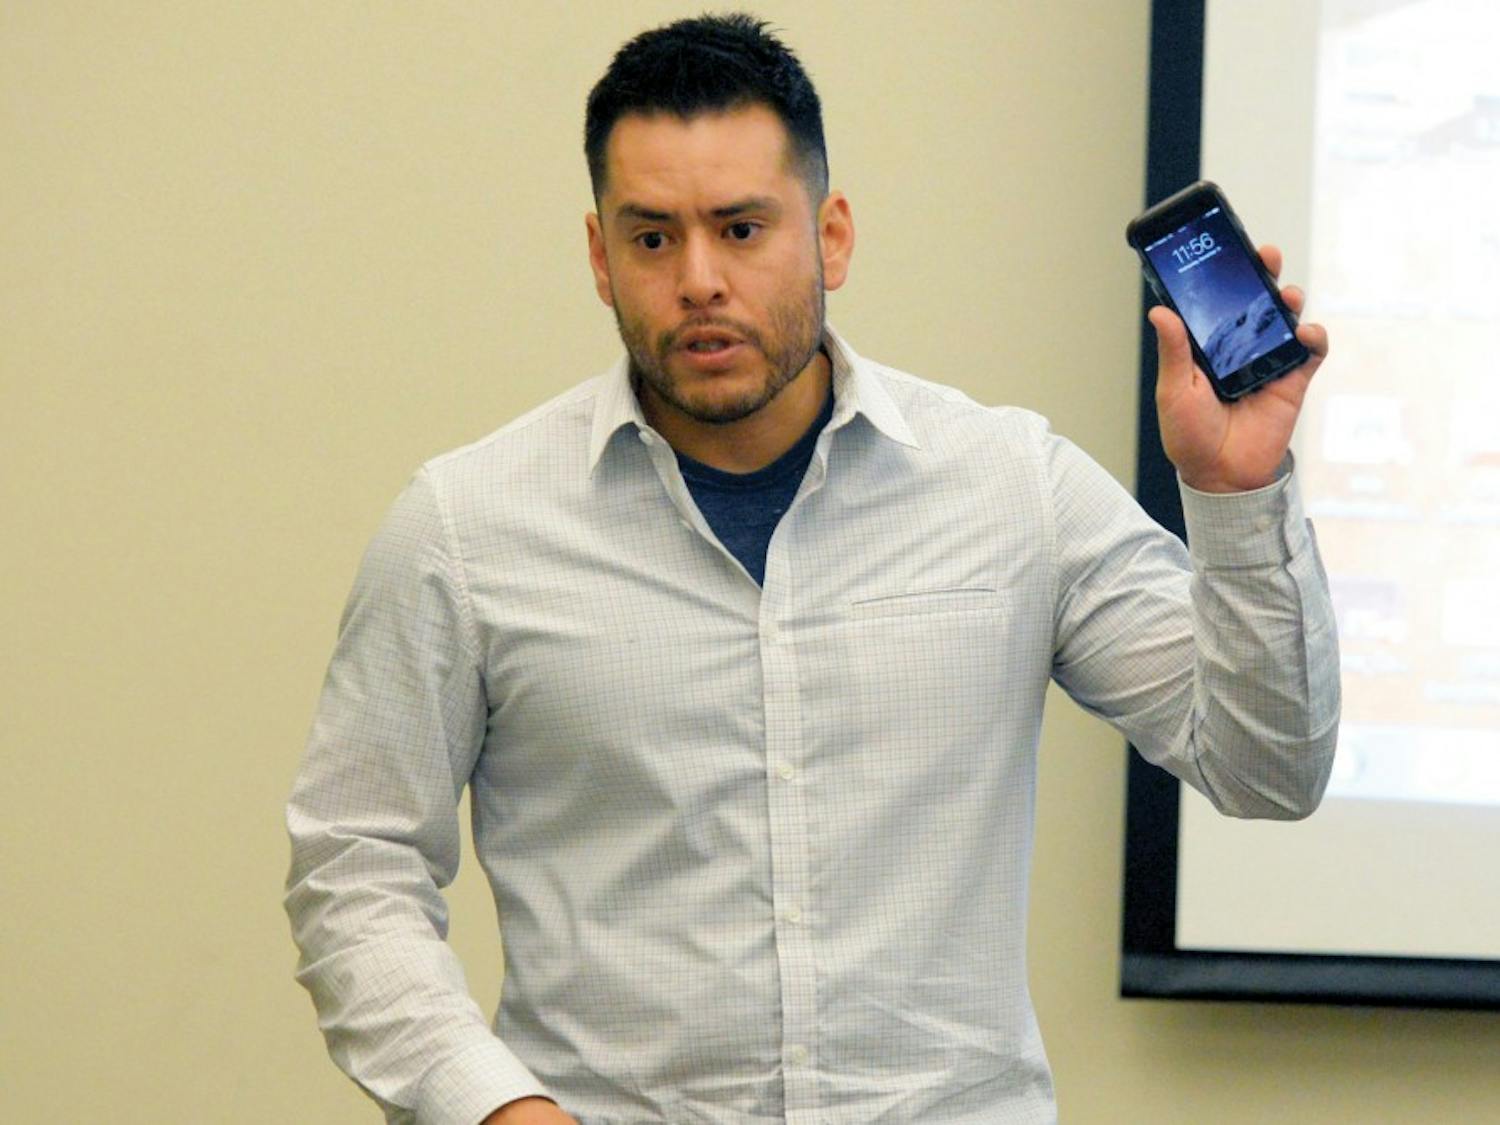 Preston Sanchez, staff attorney at the New Mexico Center on Law and Poverty, shows a cell phone at the “Your Constitutional Rights” seminar at the SUB Fiesta room on Wednesday afternoon. Sanchez touched on how to act when being questioned by law enforcement.